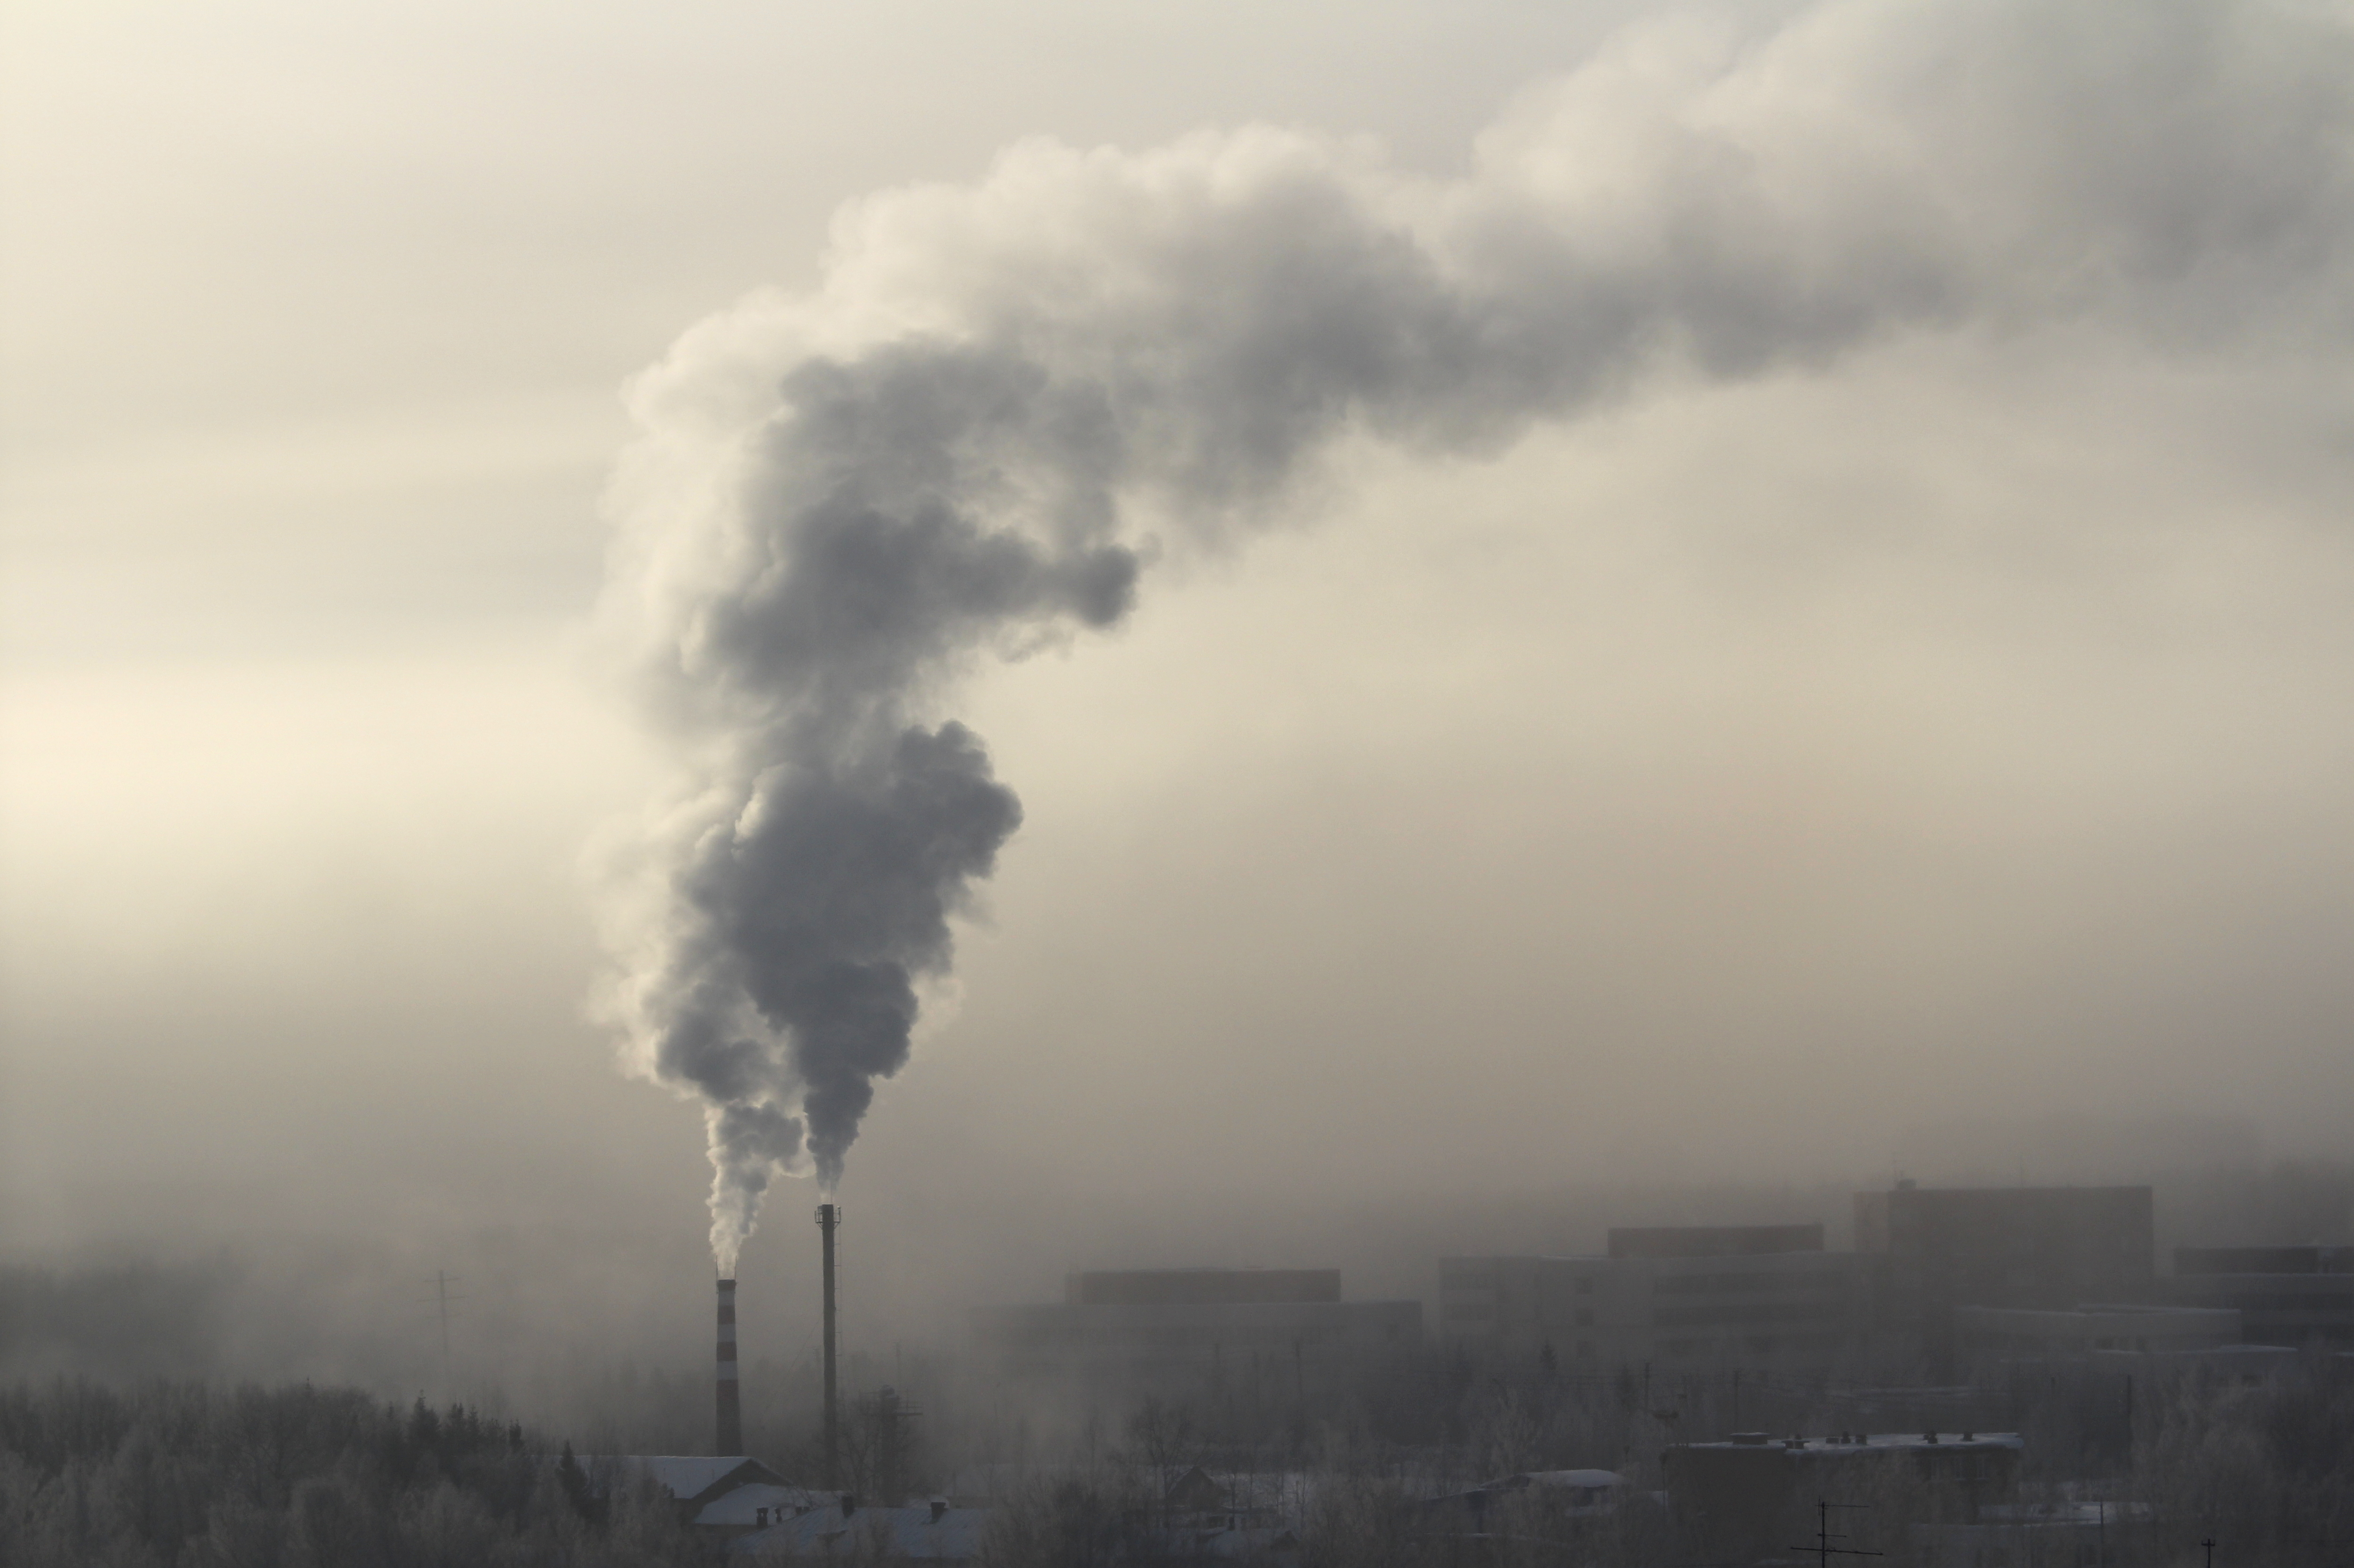 Health groups coalition call to accelerate action for clean air for health, instead of delaying